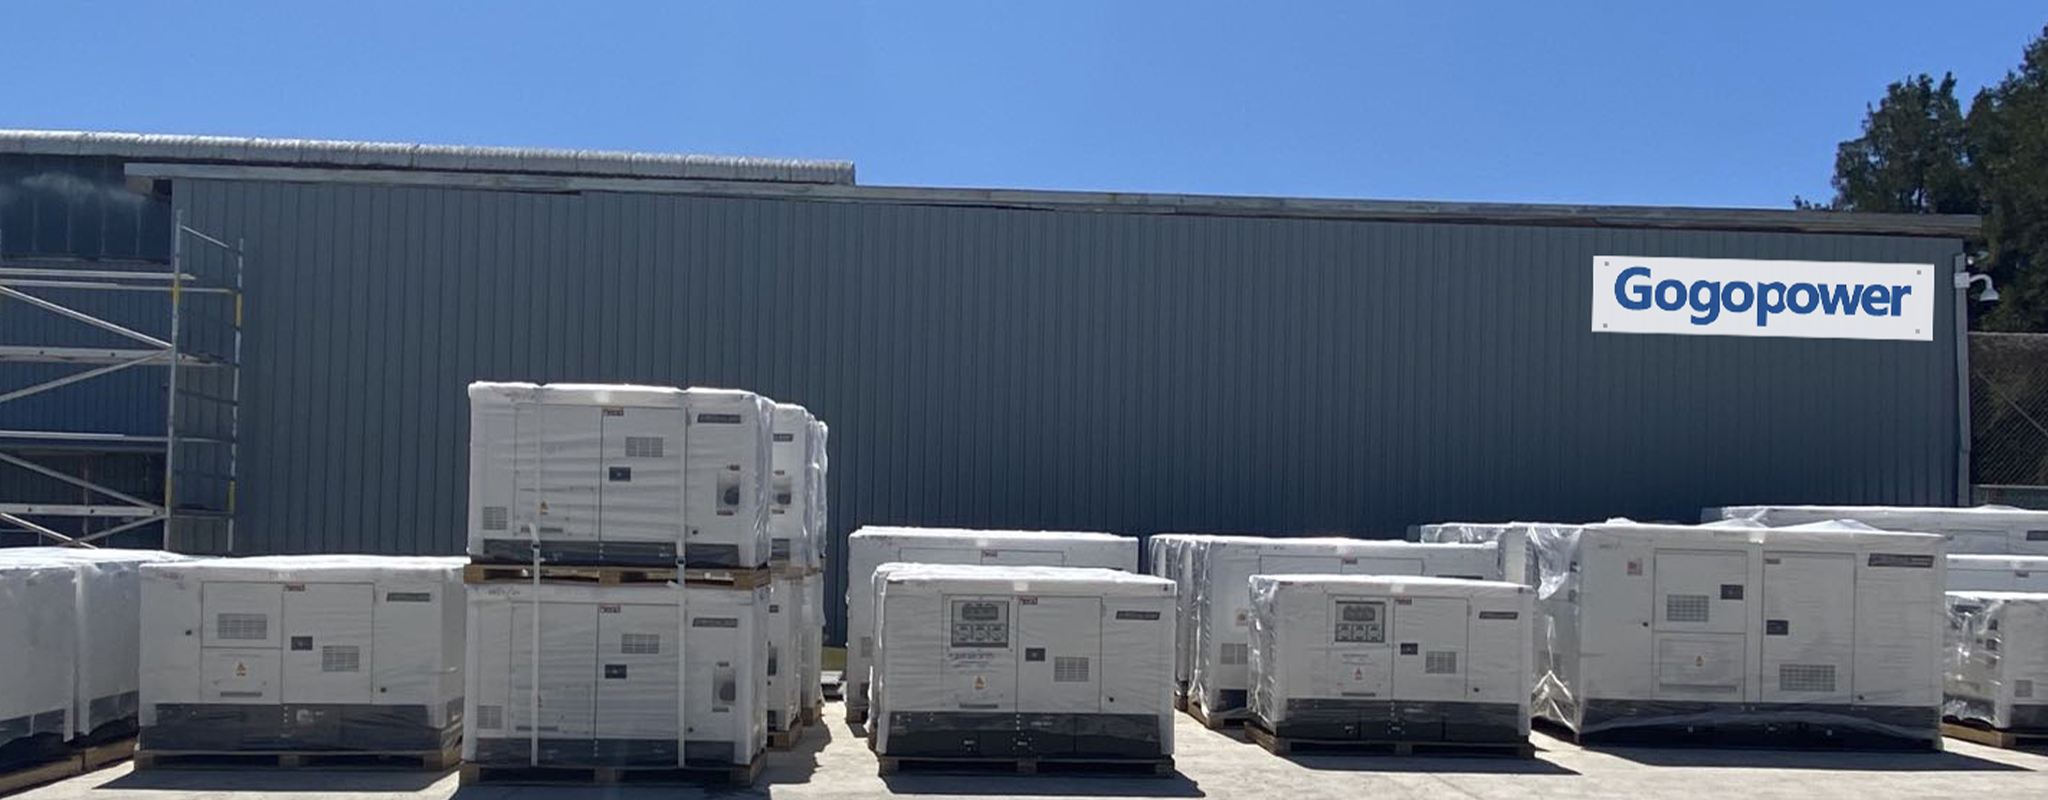 Gogopower partners Kubota, Cummins, Deep Sea Electronics, Stamford, Mecc Alte and Schneider, for the main components of our products diesel generators